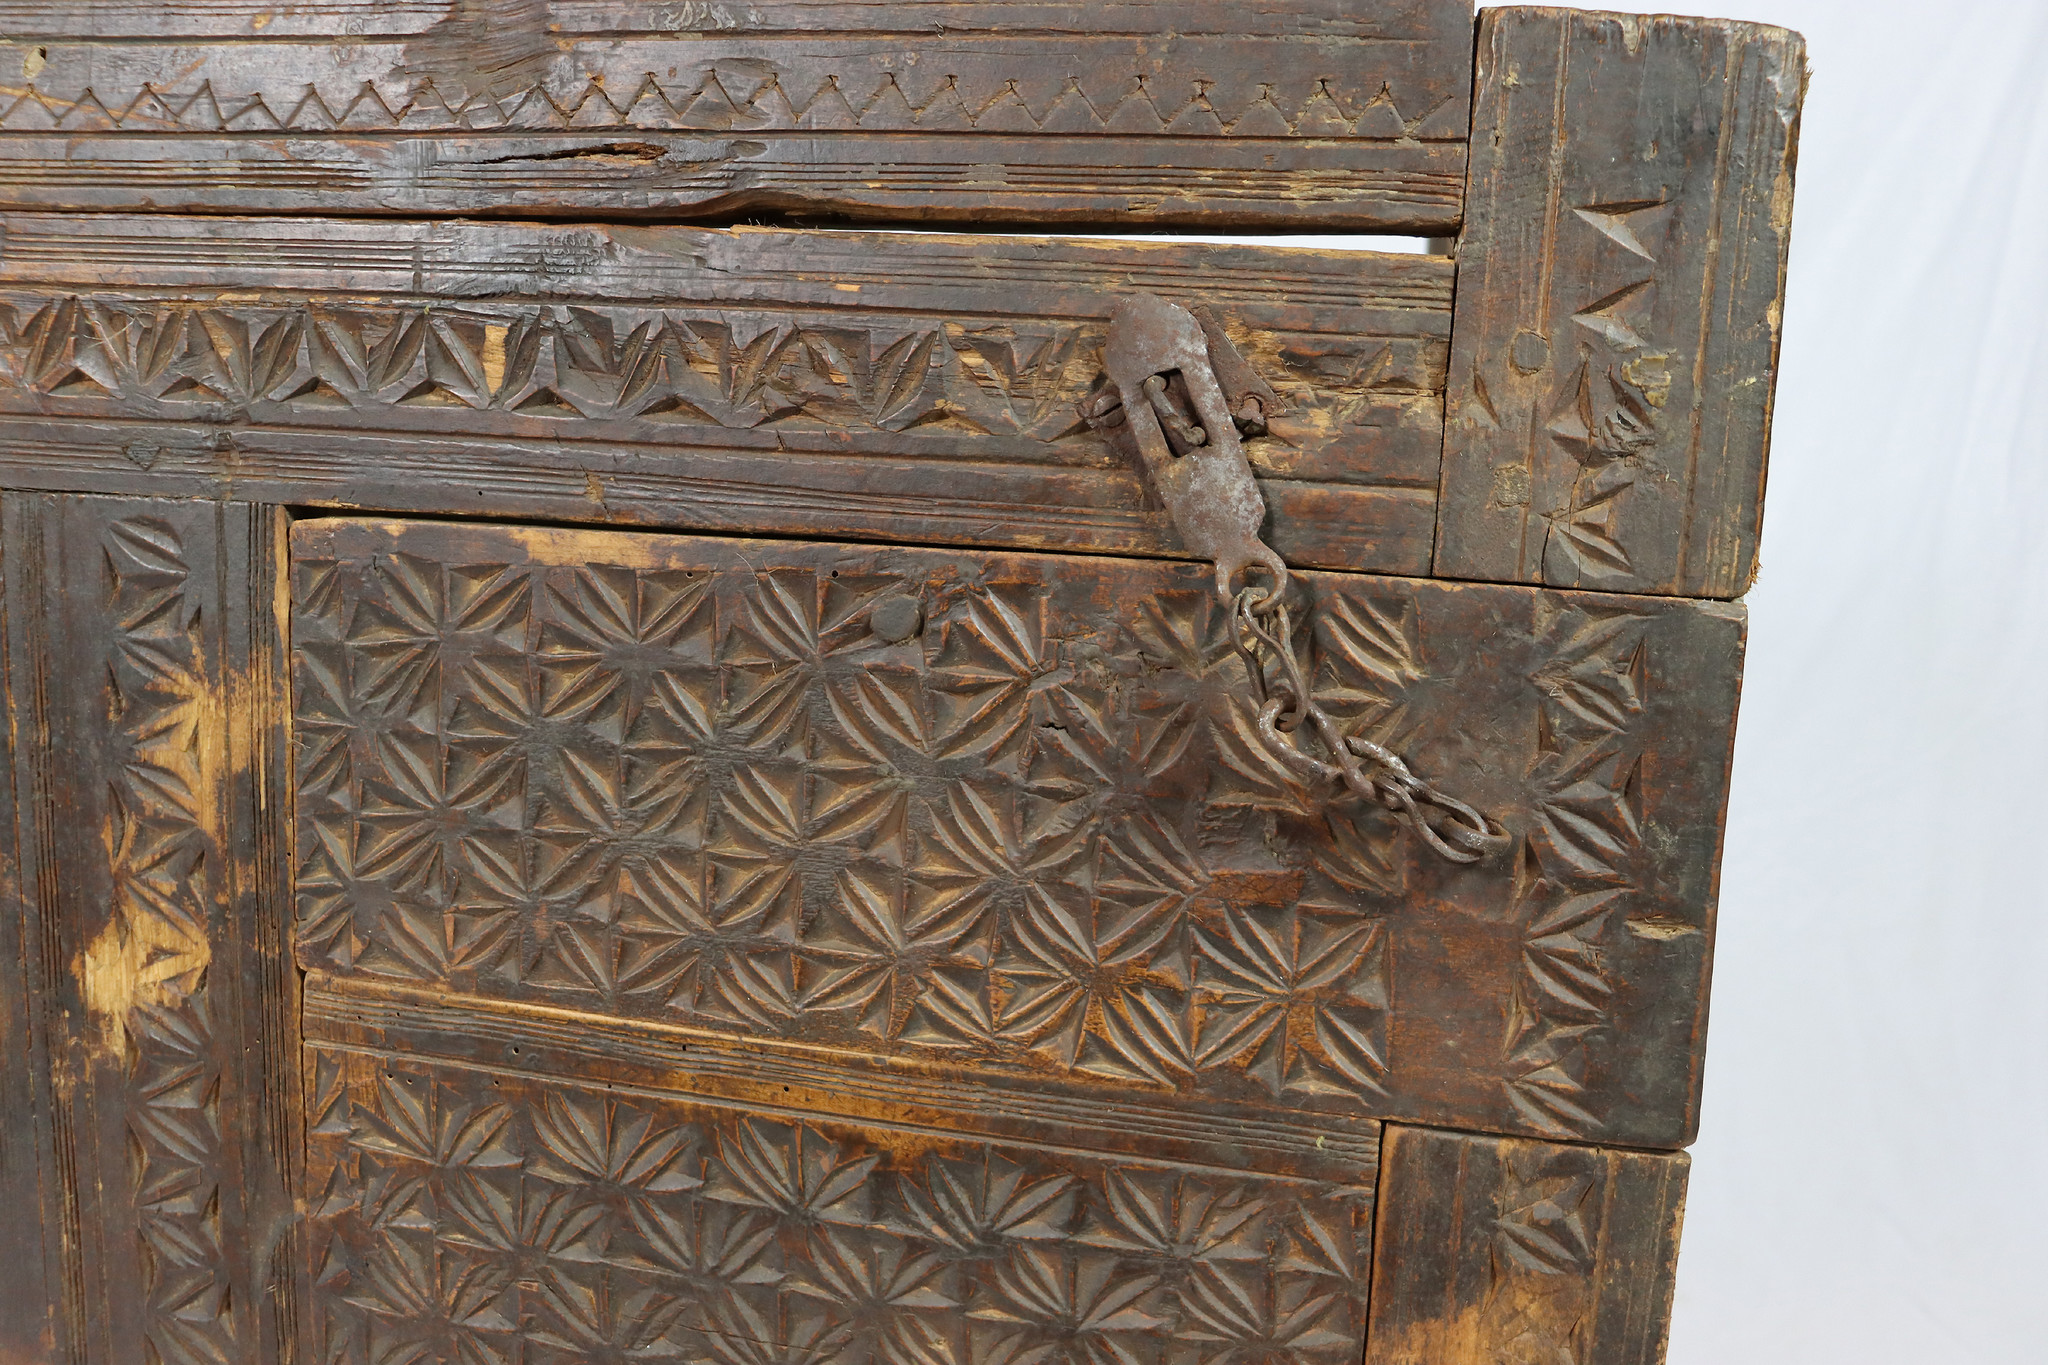 antique 19th century  wooden yurt treasure Dowry Chest from Afghanistan turkmenistan No:22/2